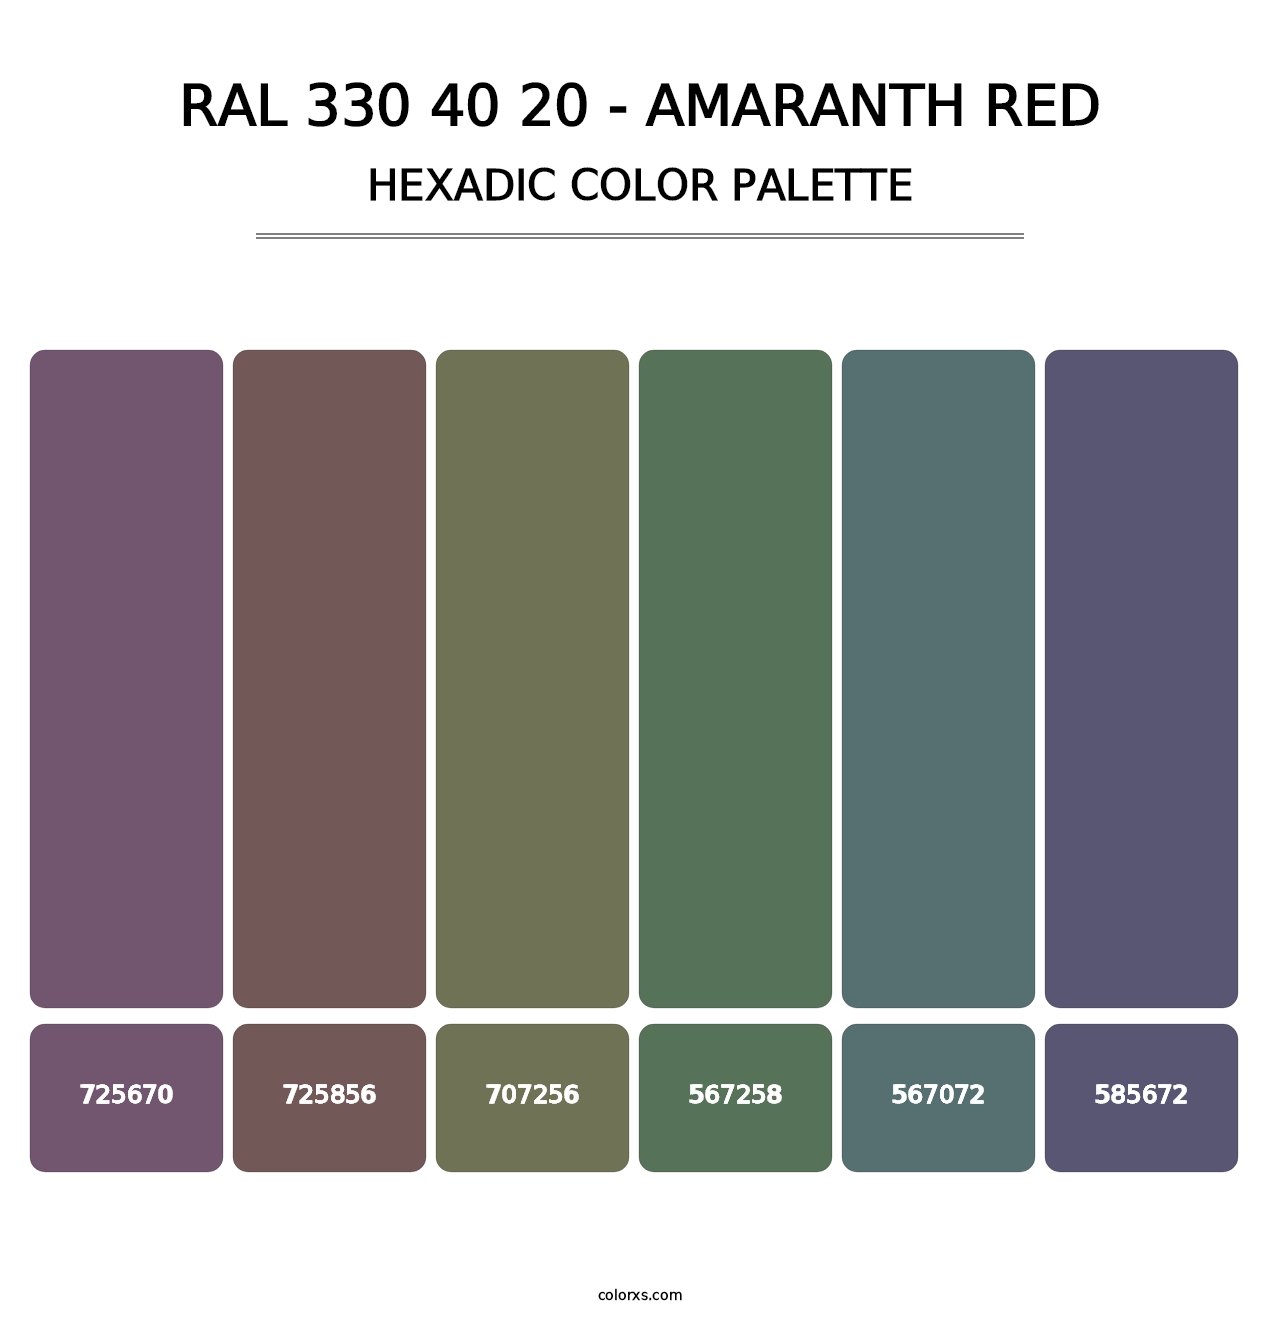 RAL 330 40 20 - Amaranth Red - Hexadic Color Palette